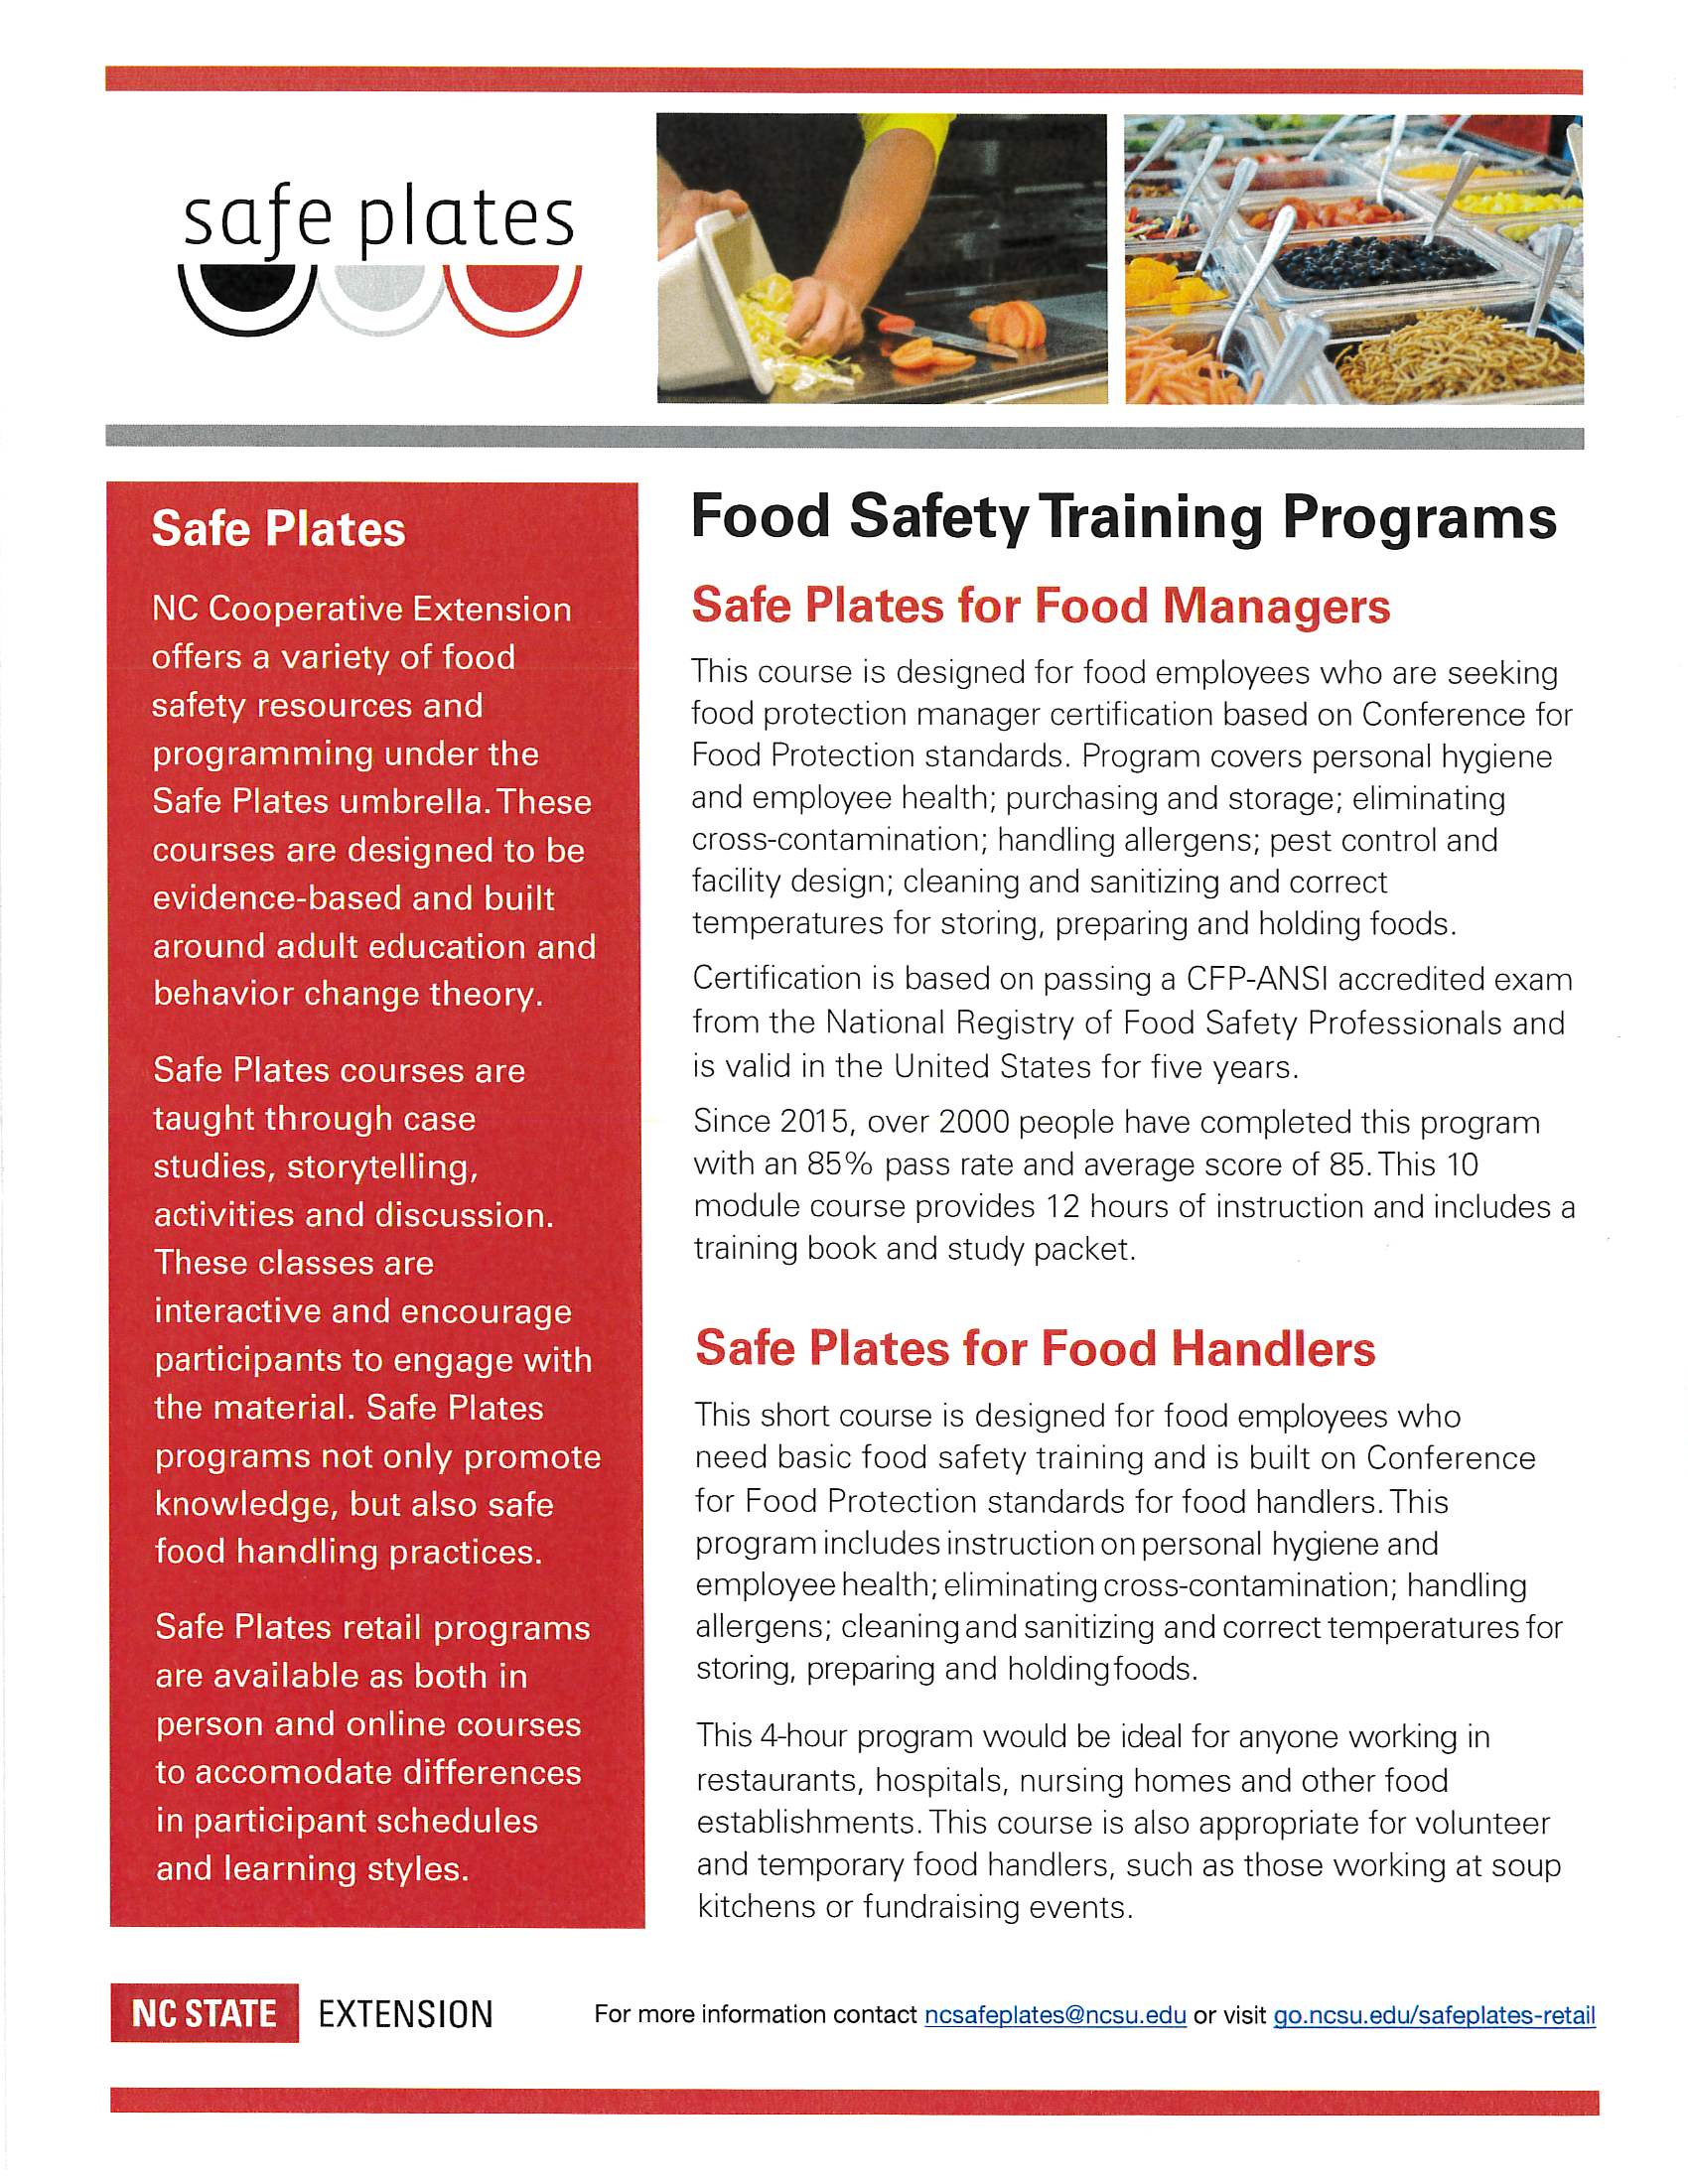 Food Safety Training Programs, Safe Plates for Food Managers, Safe Plates for Food Handlers